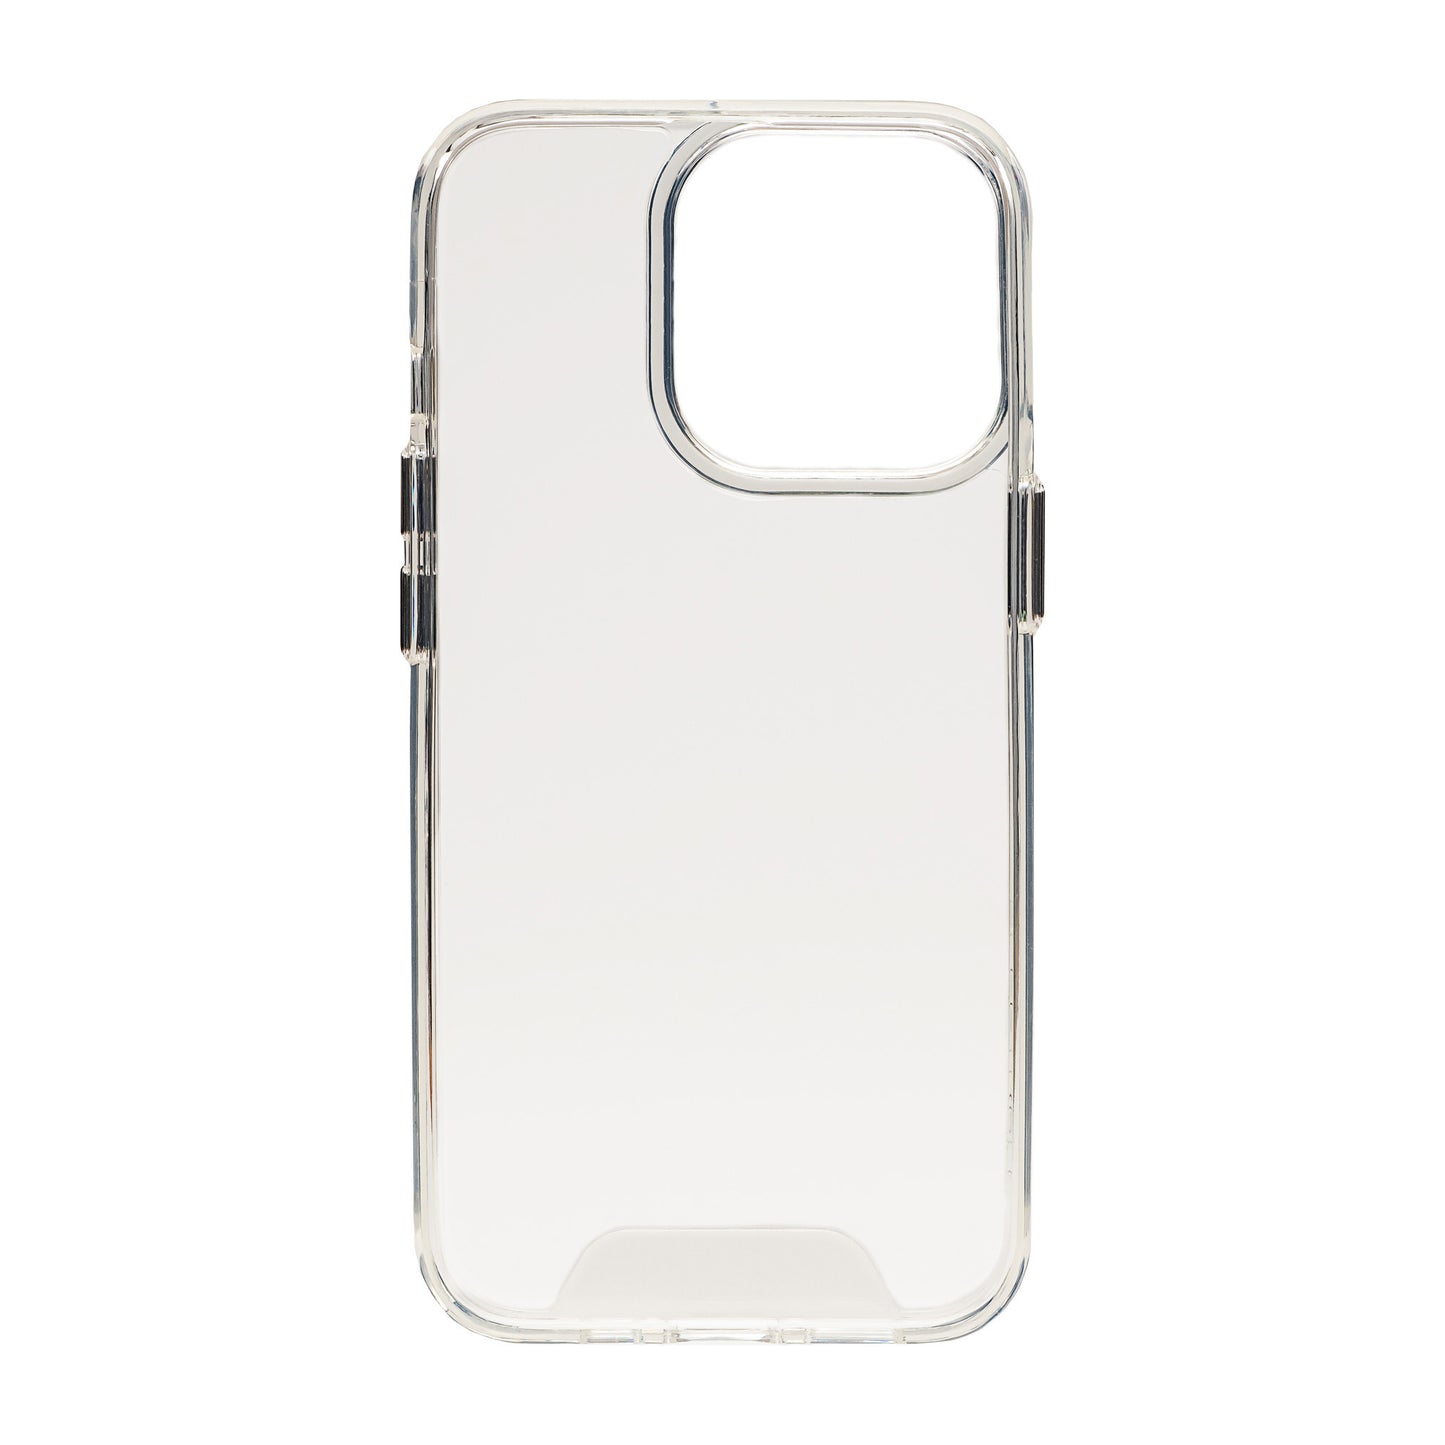 iPhone 13 Pro Spectrum Clearly Slim Case - Clear - 15-09301